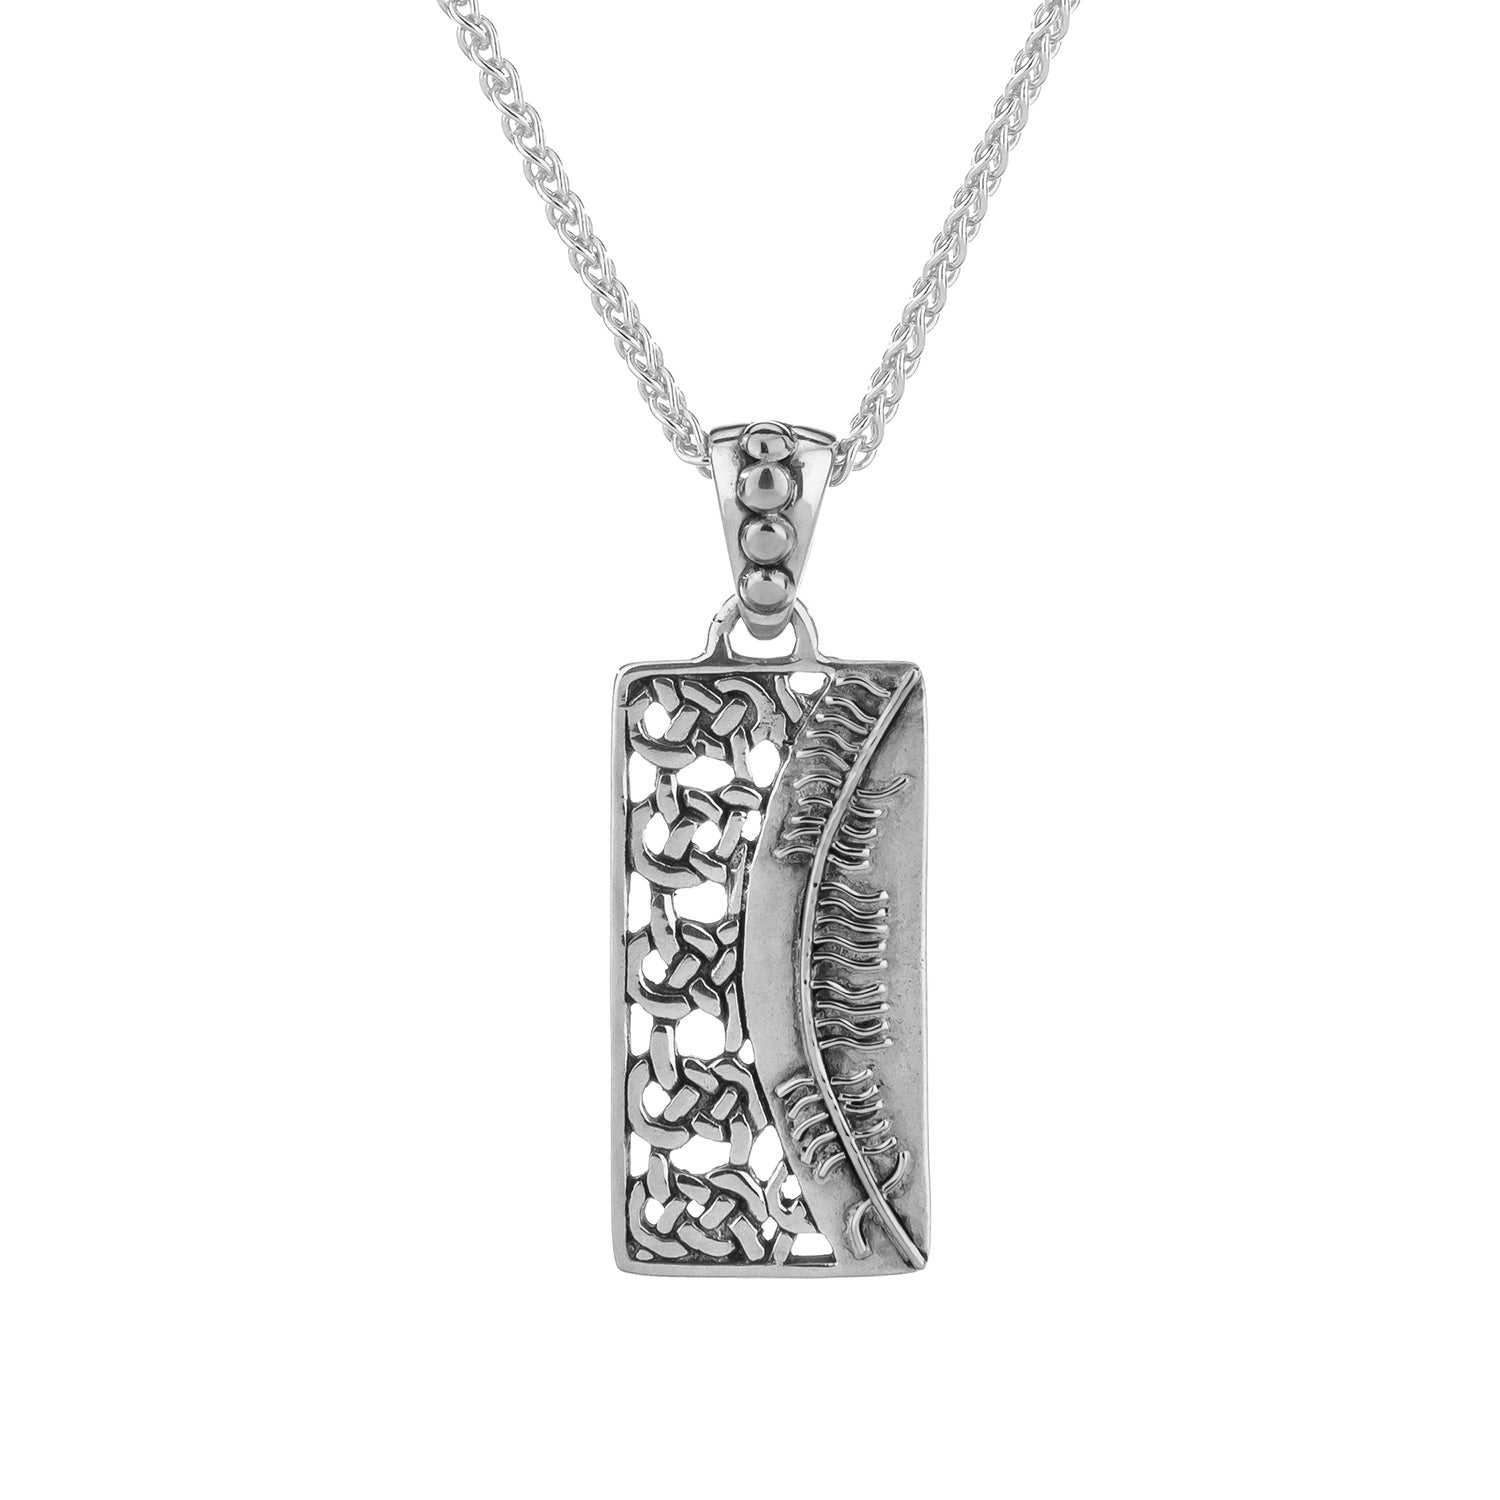 Men's Sterling Silver Locket Necklace, 'Heart of Courage